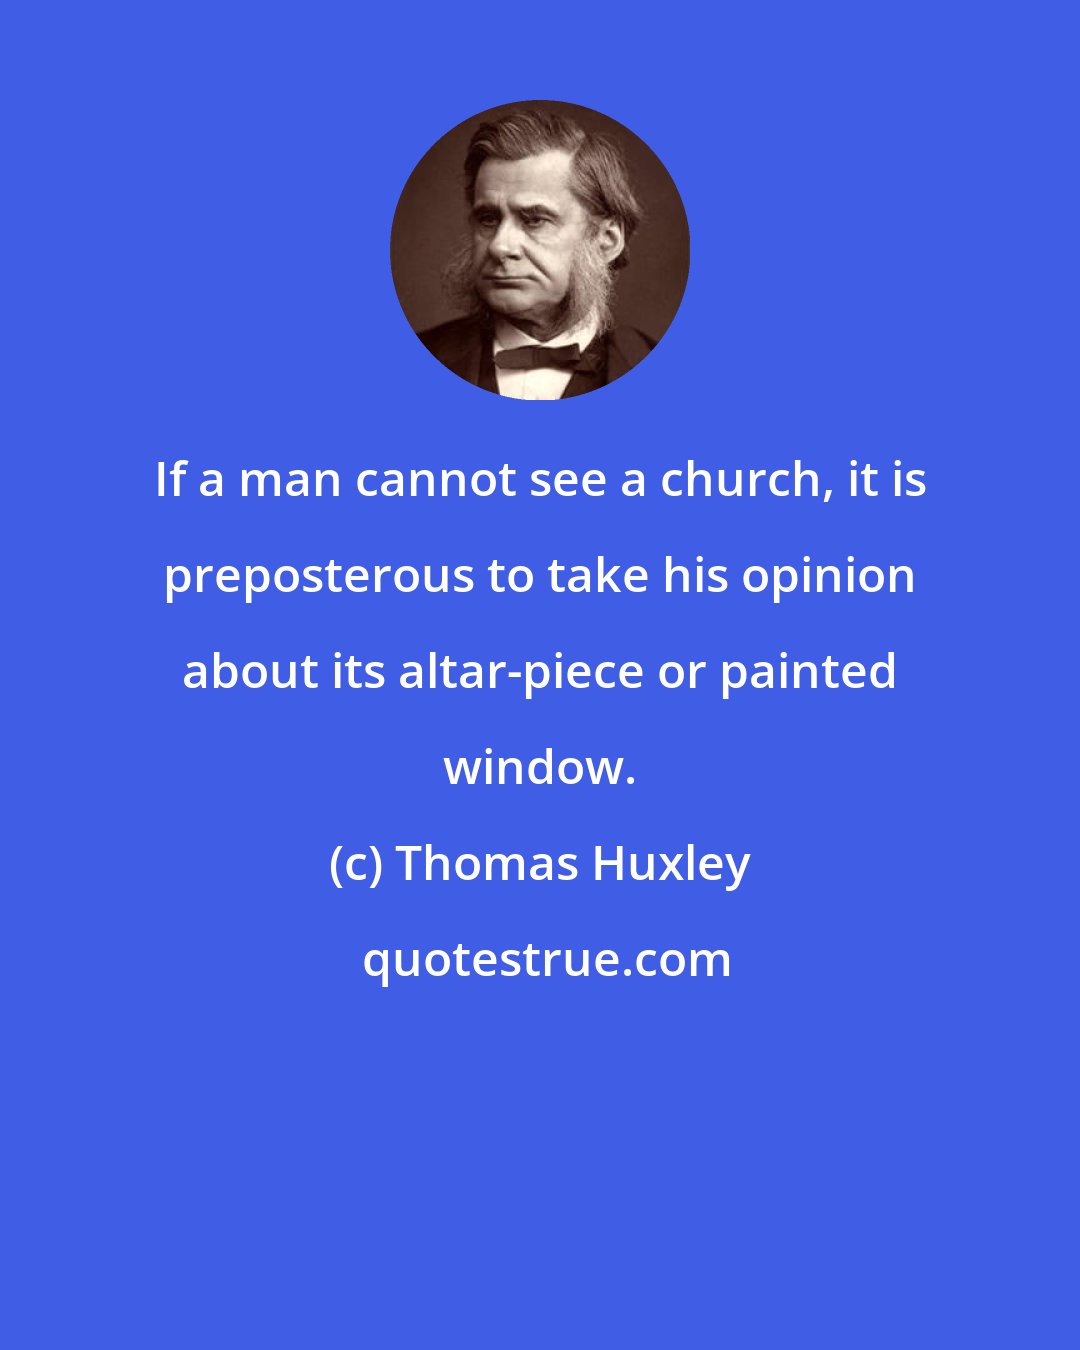 Thomas Huxley: If a man cannot see a church, it is preposterous to take his opinion about its altar-piece or painted window.